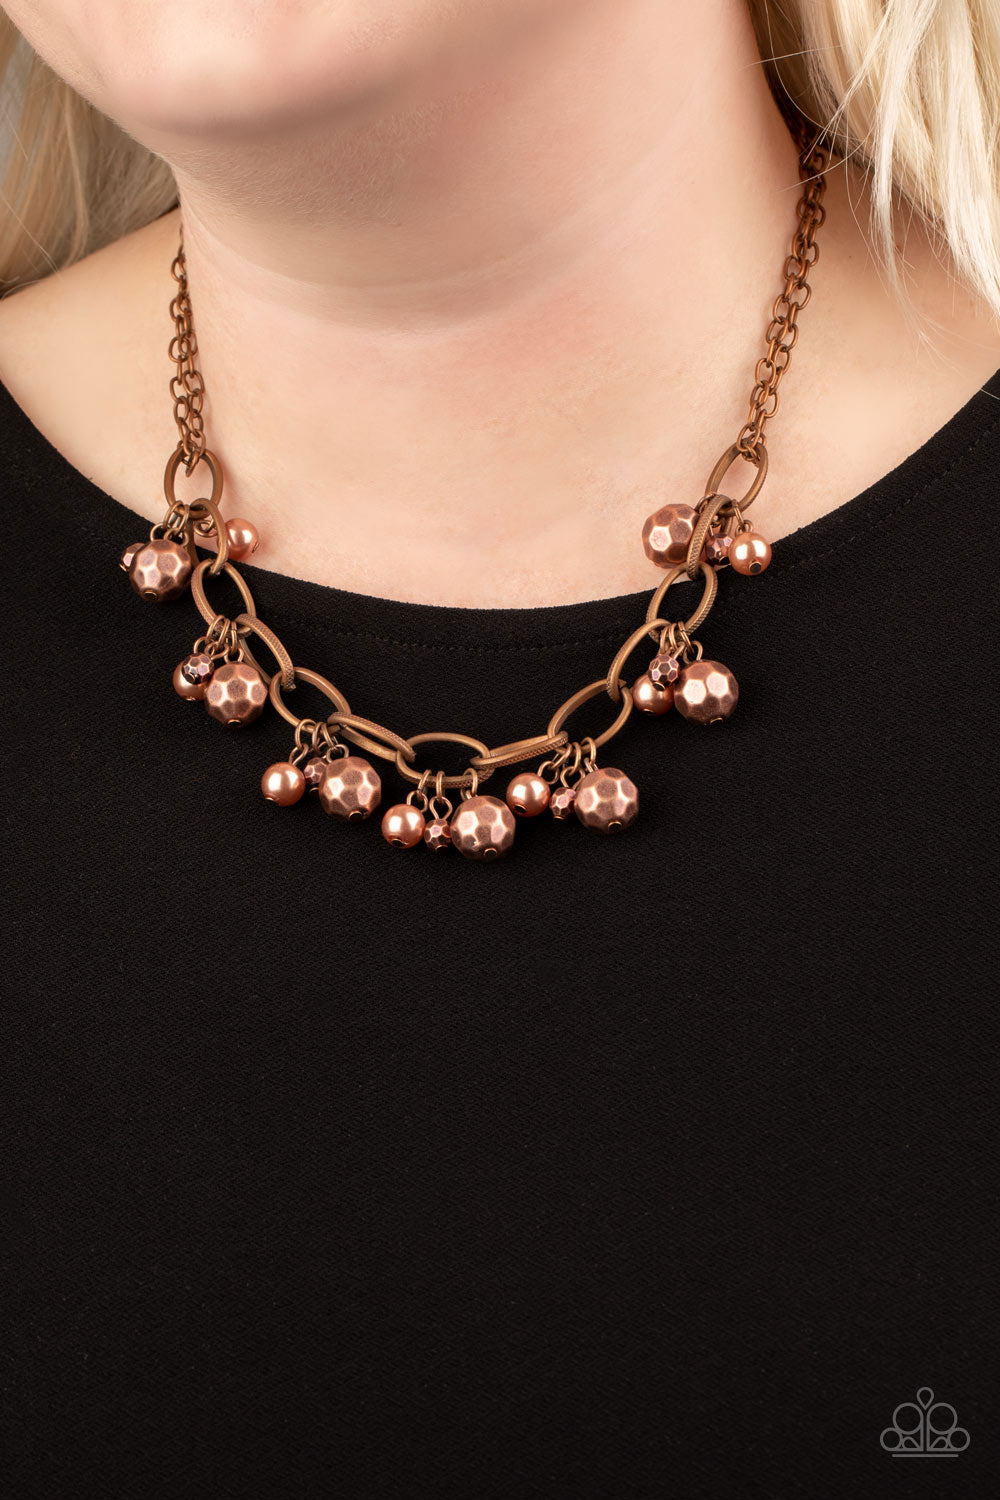 Paparazzi Necklace - Copper Varying in size, a collection of faceted copper and pearly copper beads swing from a bold copper chain, creating a whimsical metallic fringe below the collar. 